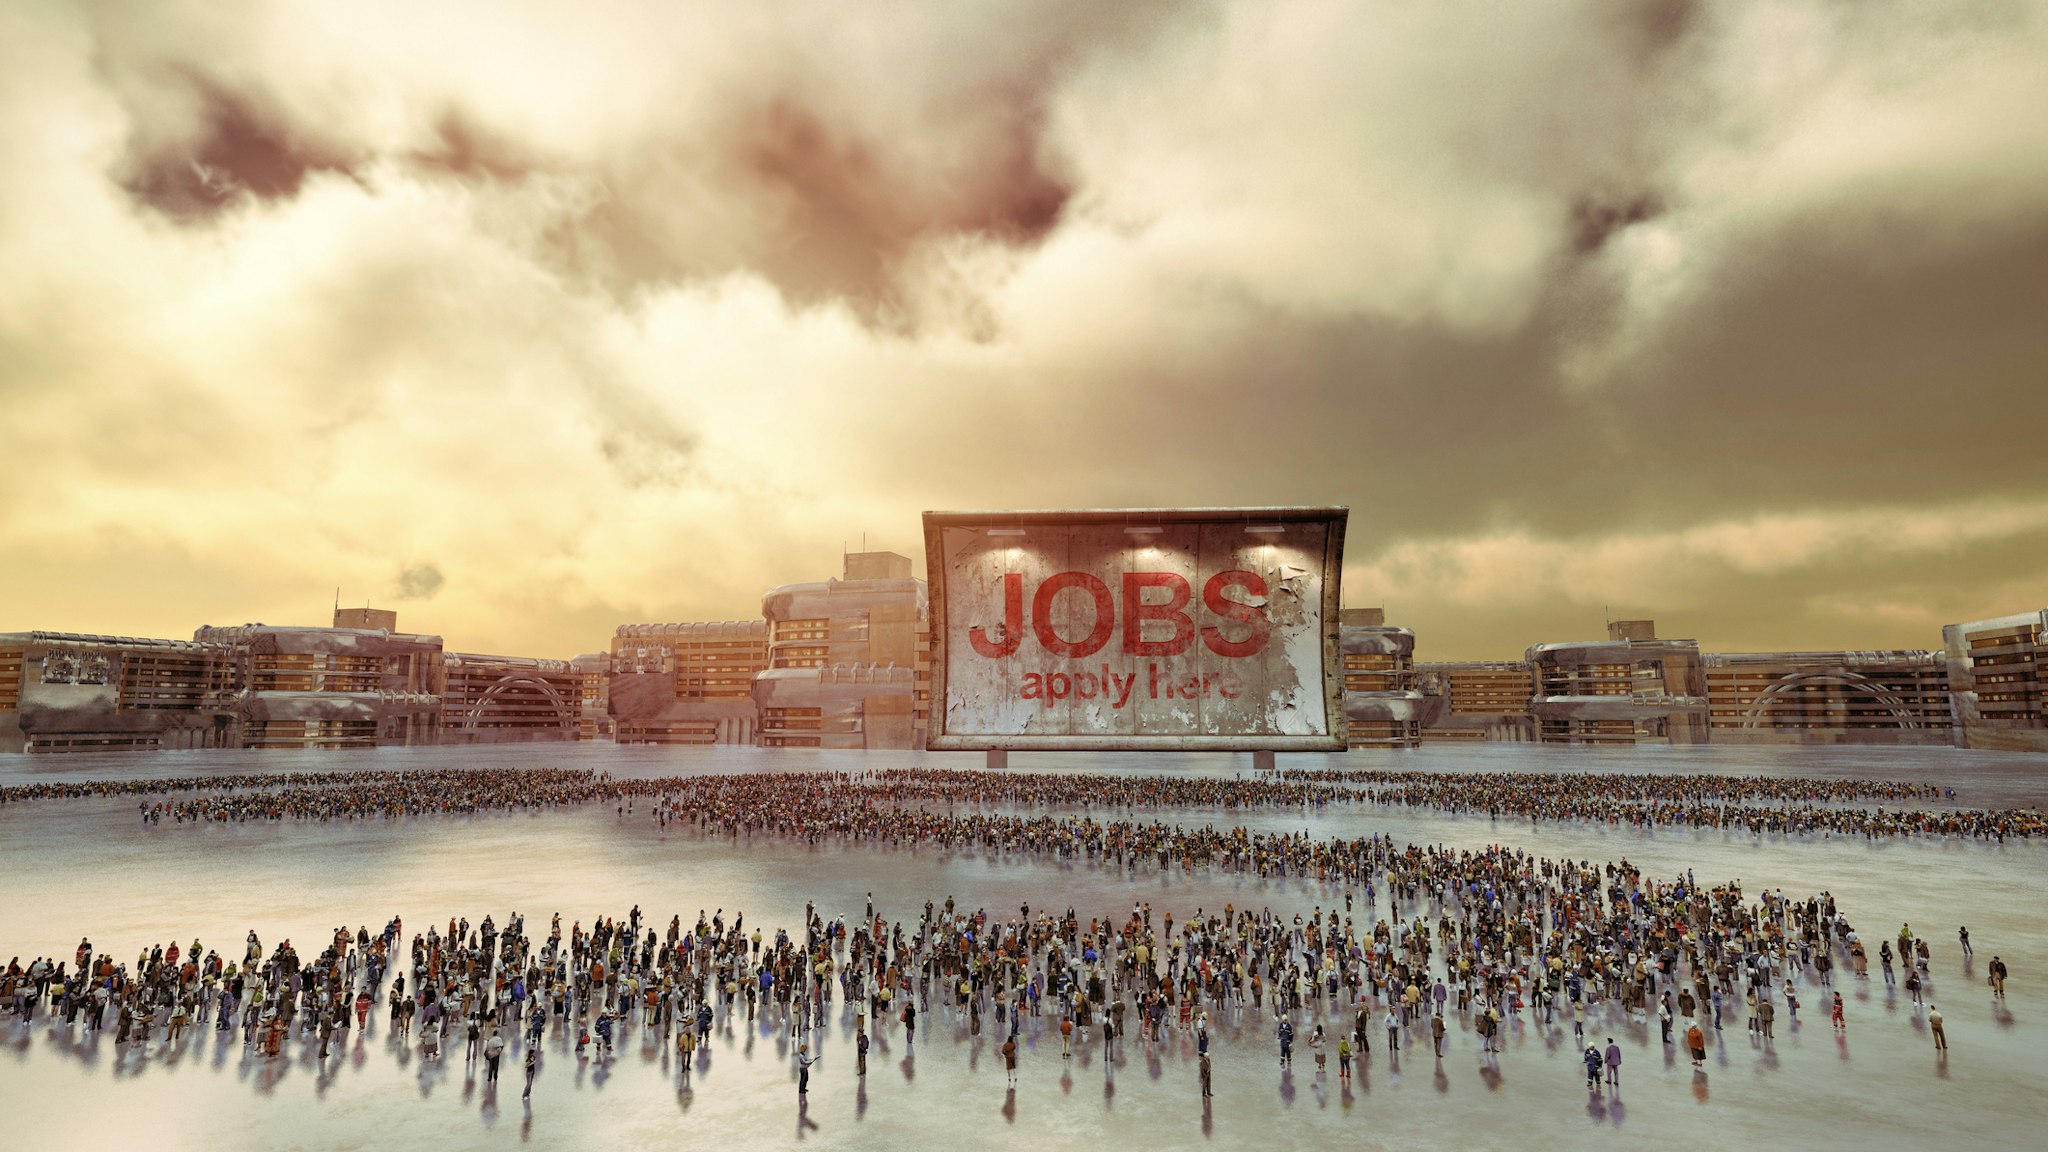 Crowd of unemployed people looking for a job - stock photo